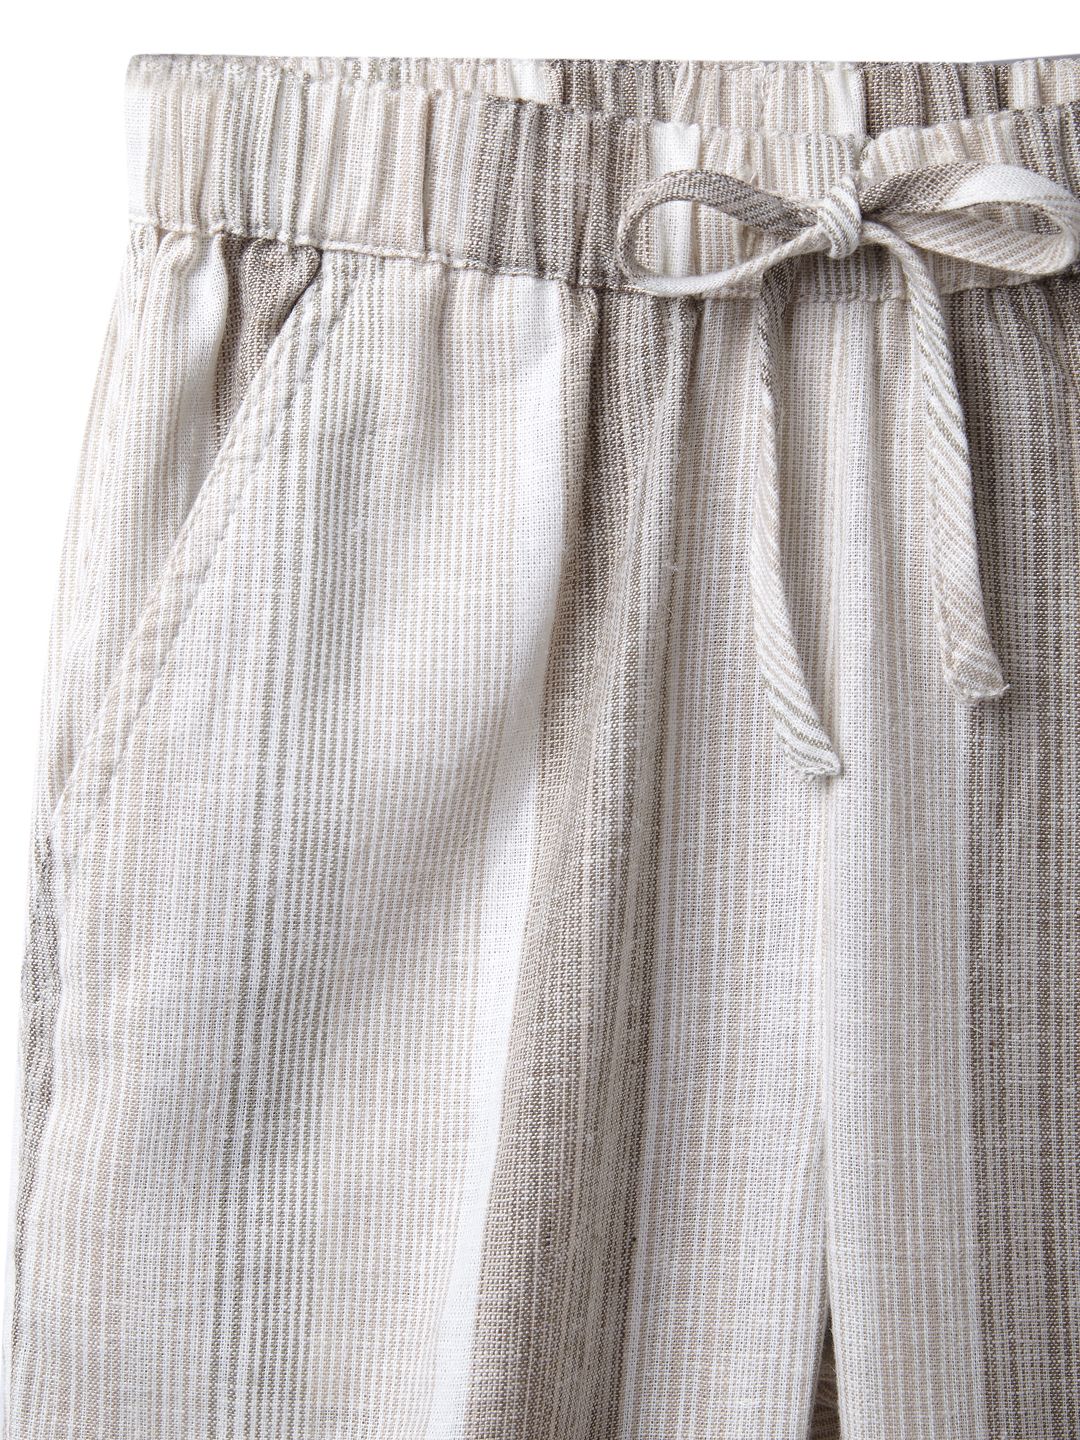 Buy Boys Linen Pants Boys Linen Outfit Linen Pants for Kids Online in  India  Etsy